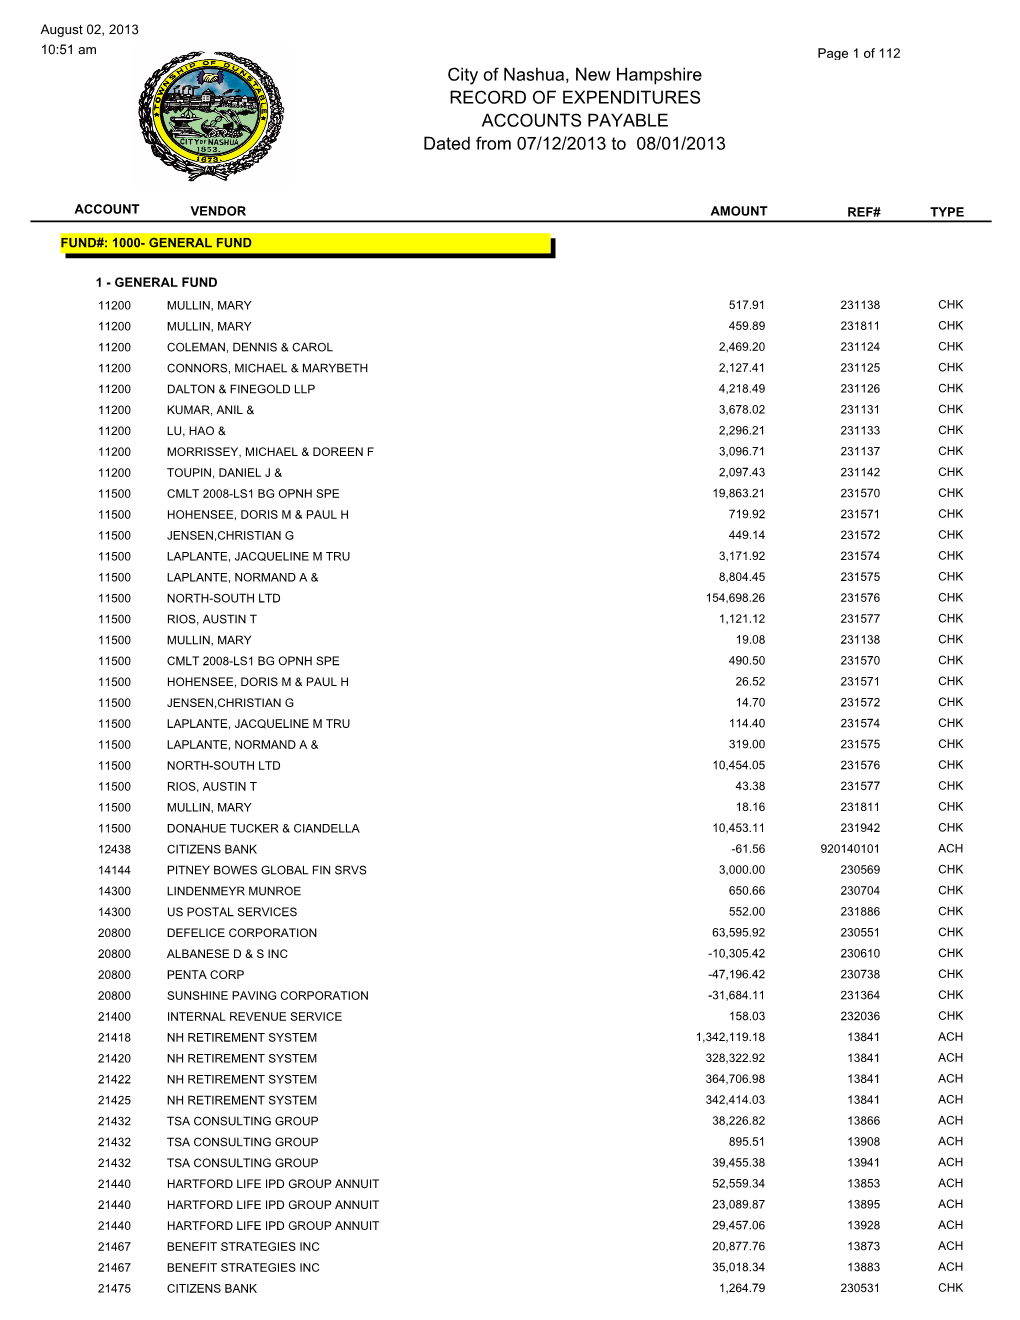 City of Nashua, New Hampshire RECORD of EXPENDITURES ACCOUNTS PAYABLE Dated from 07/12/2013 to 08/01/2013